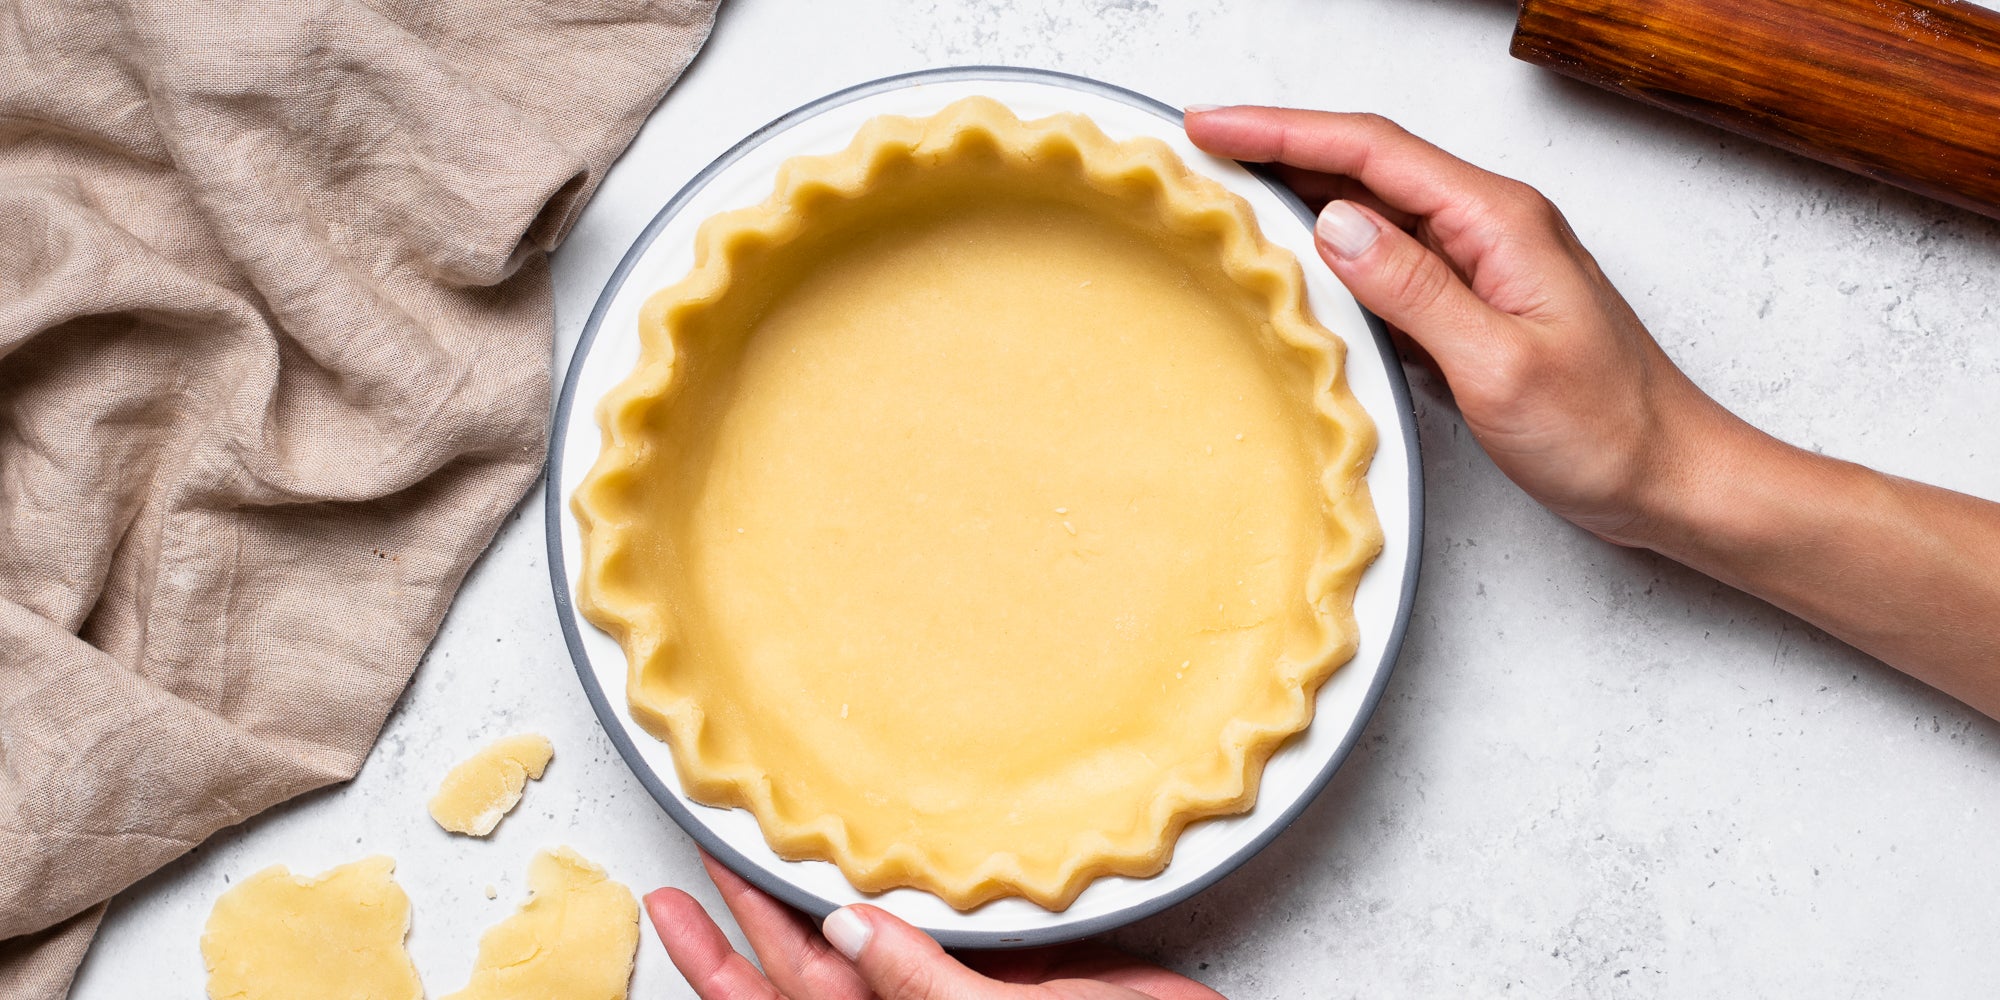 Gently placing homemade shortcrust pastry into a scalloped pie dish